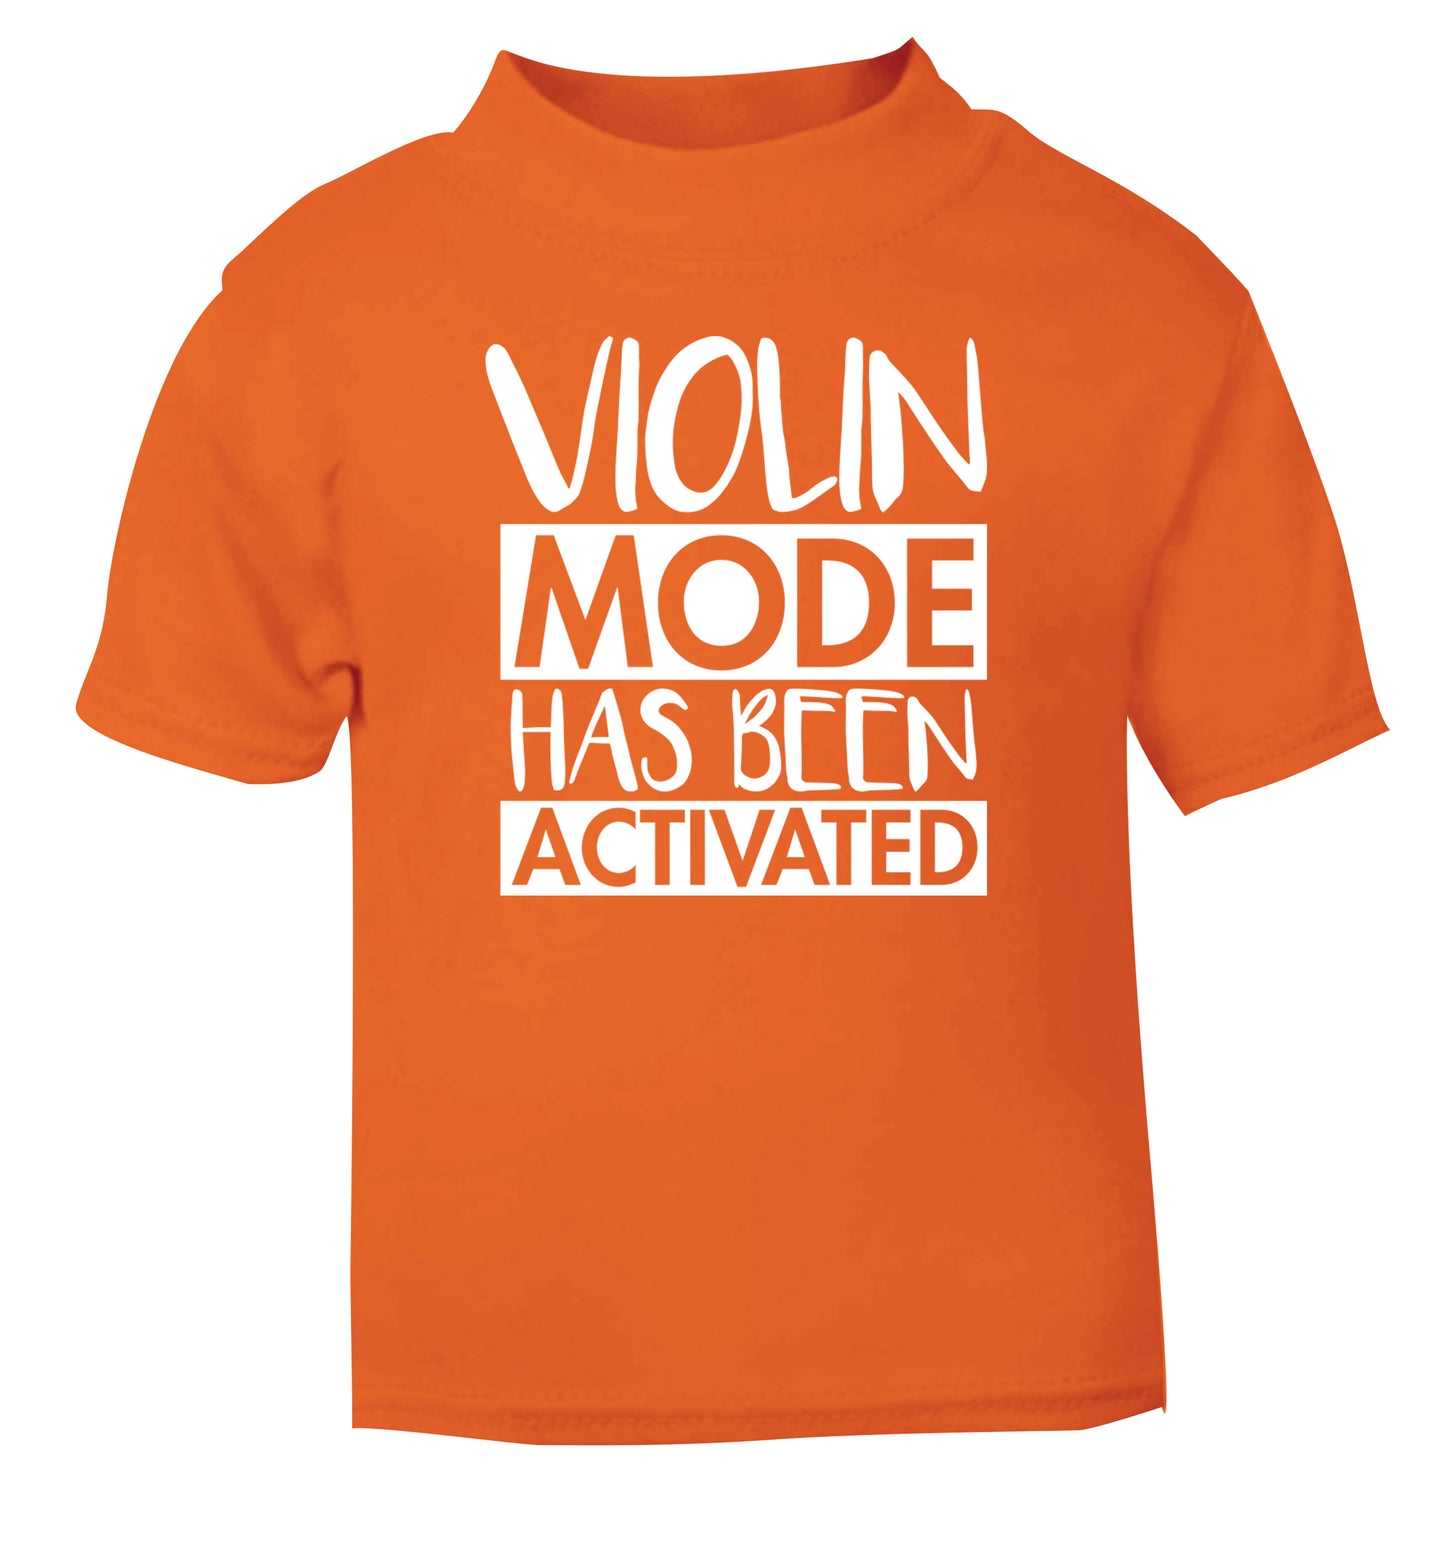 Violin Mode Activated orange Baby Toddler Tshirt 2 Years